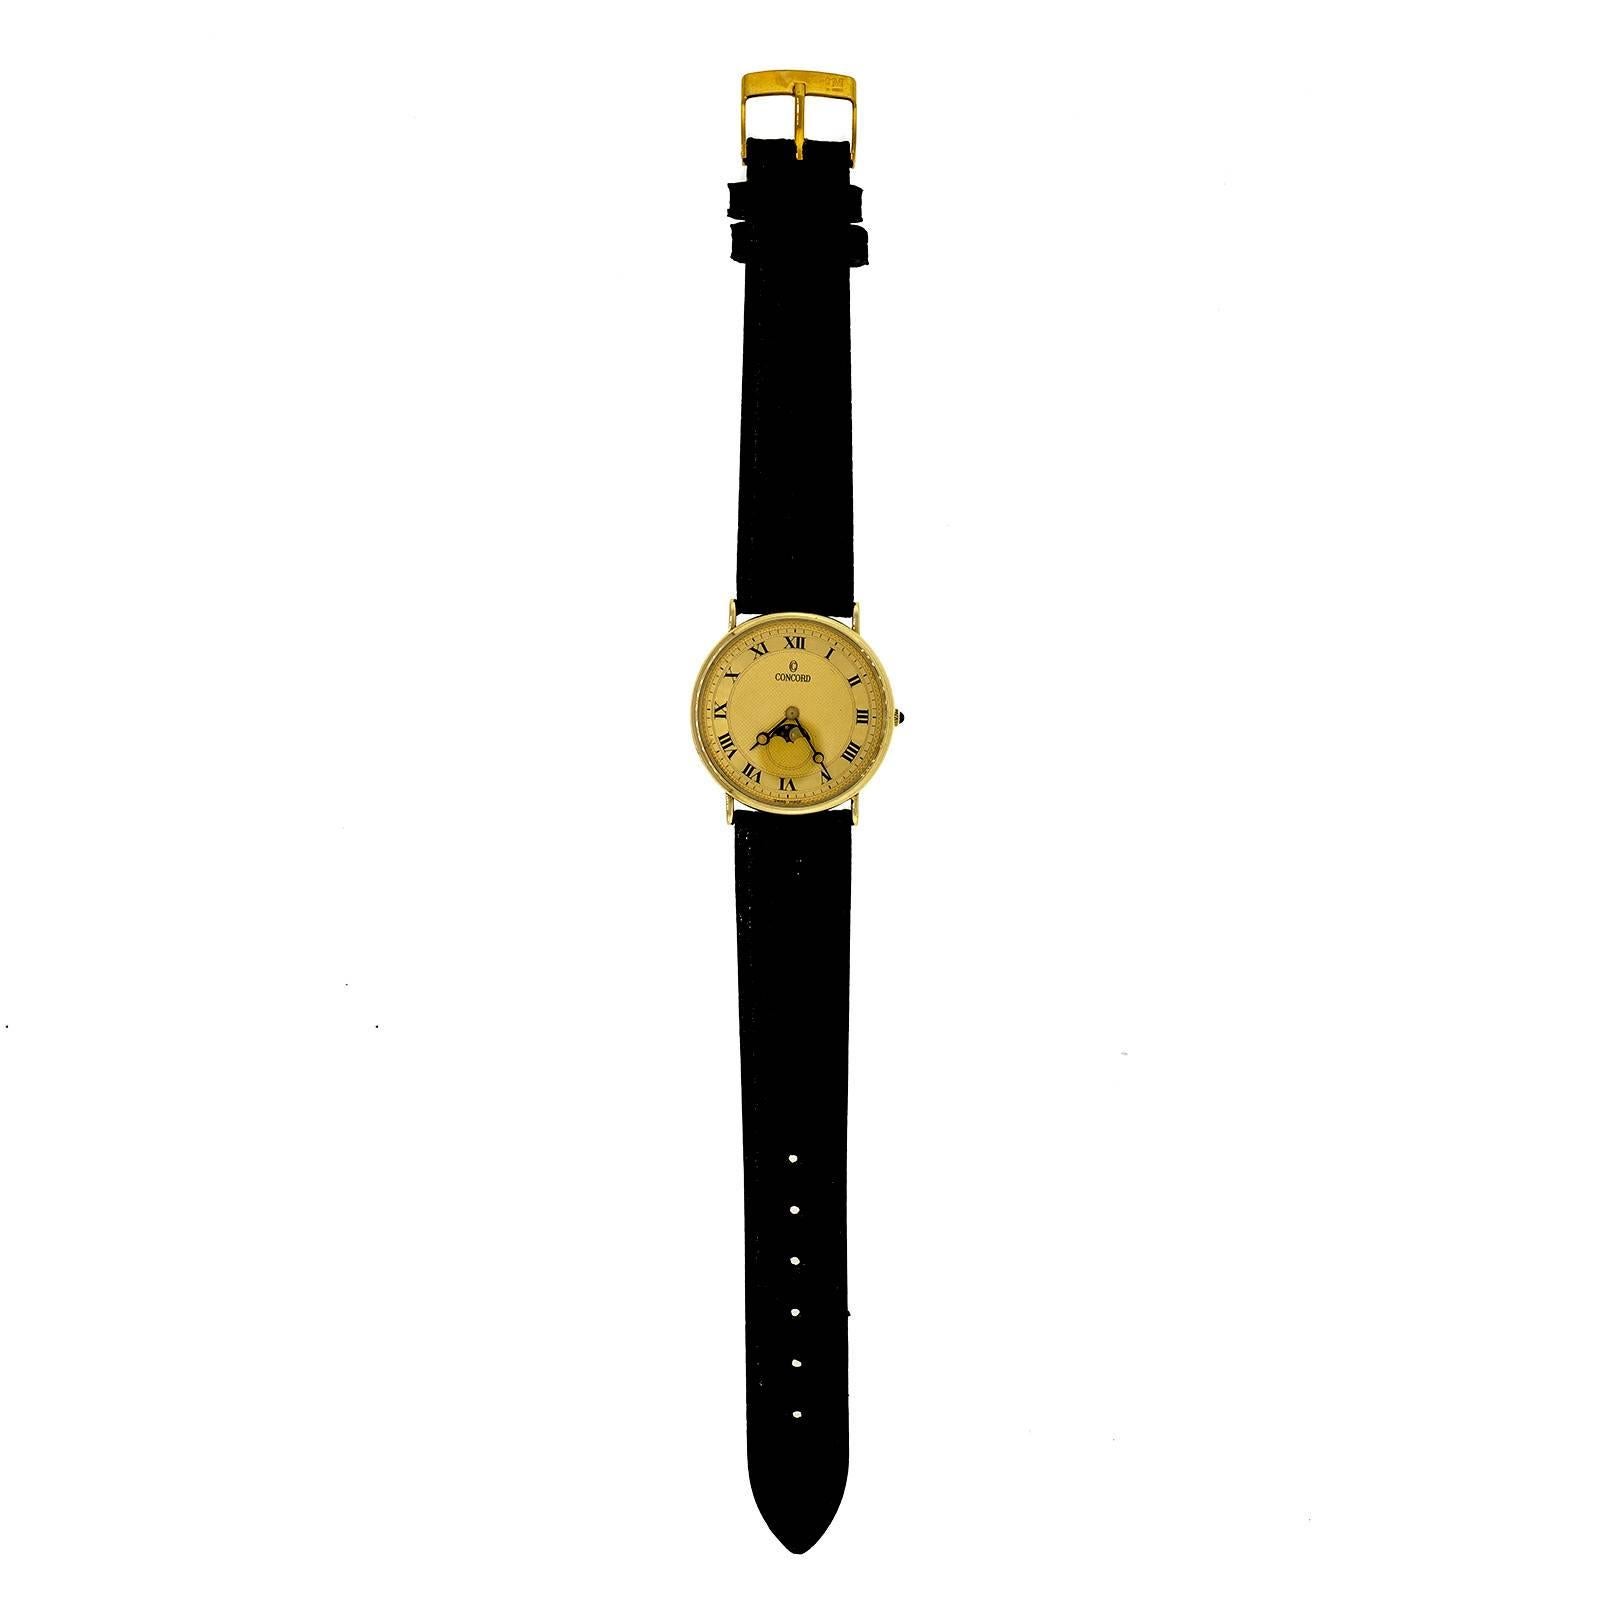 Concord Moonphase 14 karat yellow gold ultra-thin quartz. 

14k Yellow gold
24.4 grams
Length: 35.05mm
Width: 30.00mm
Band width at case: 18mm
Case thickness: 4.53mm
Band: New genuine Lizard made in Italy with minor showcase wear
Crystal: